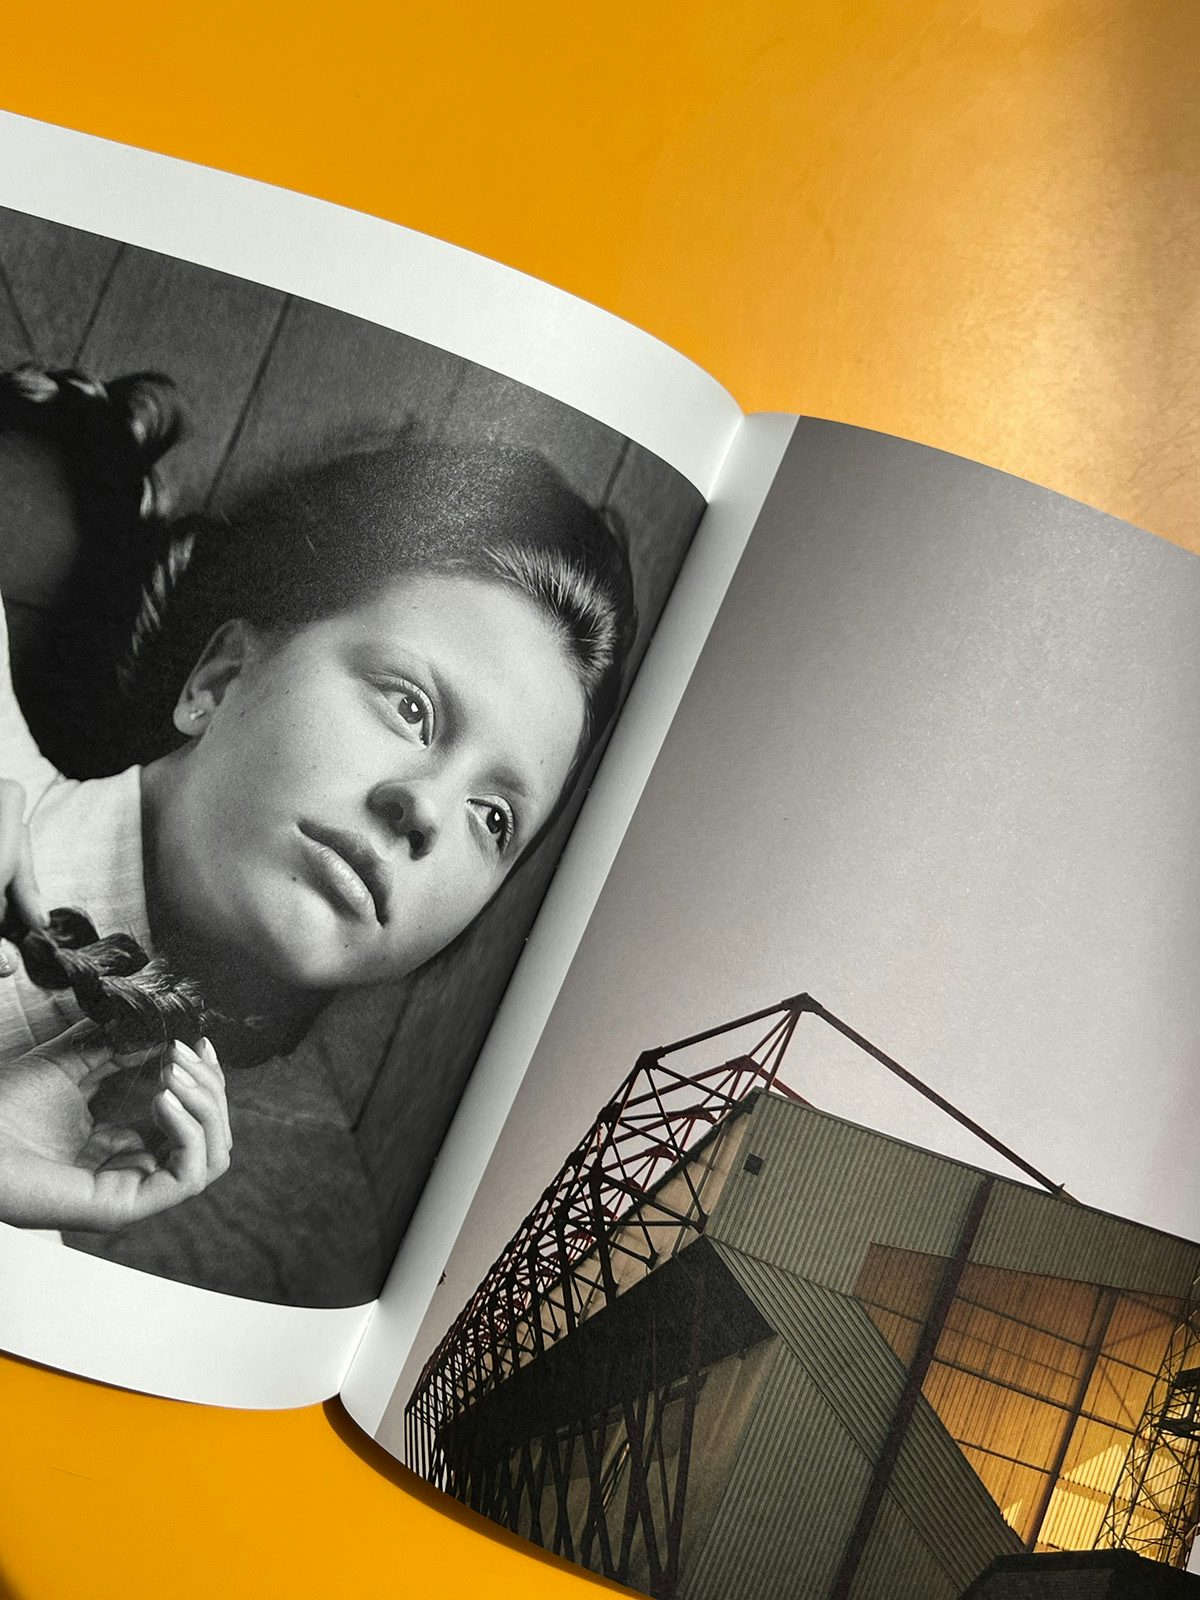 Photo of Alasdair McLellan's Home and Away photo books on an orange tabletop, featuring a black and white portrait of Mia Goth with plaits on the left hand page and an exterior photo of a stadium on the right hand page